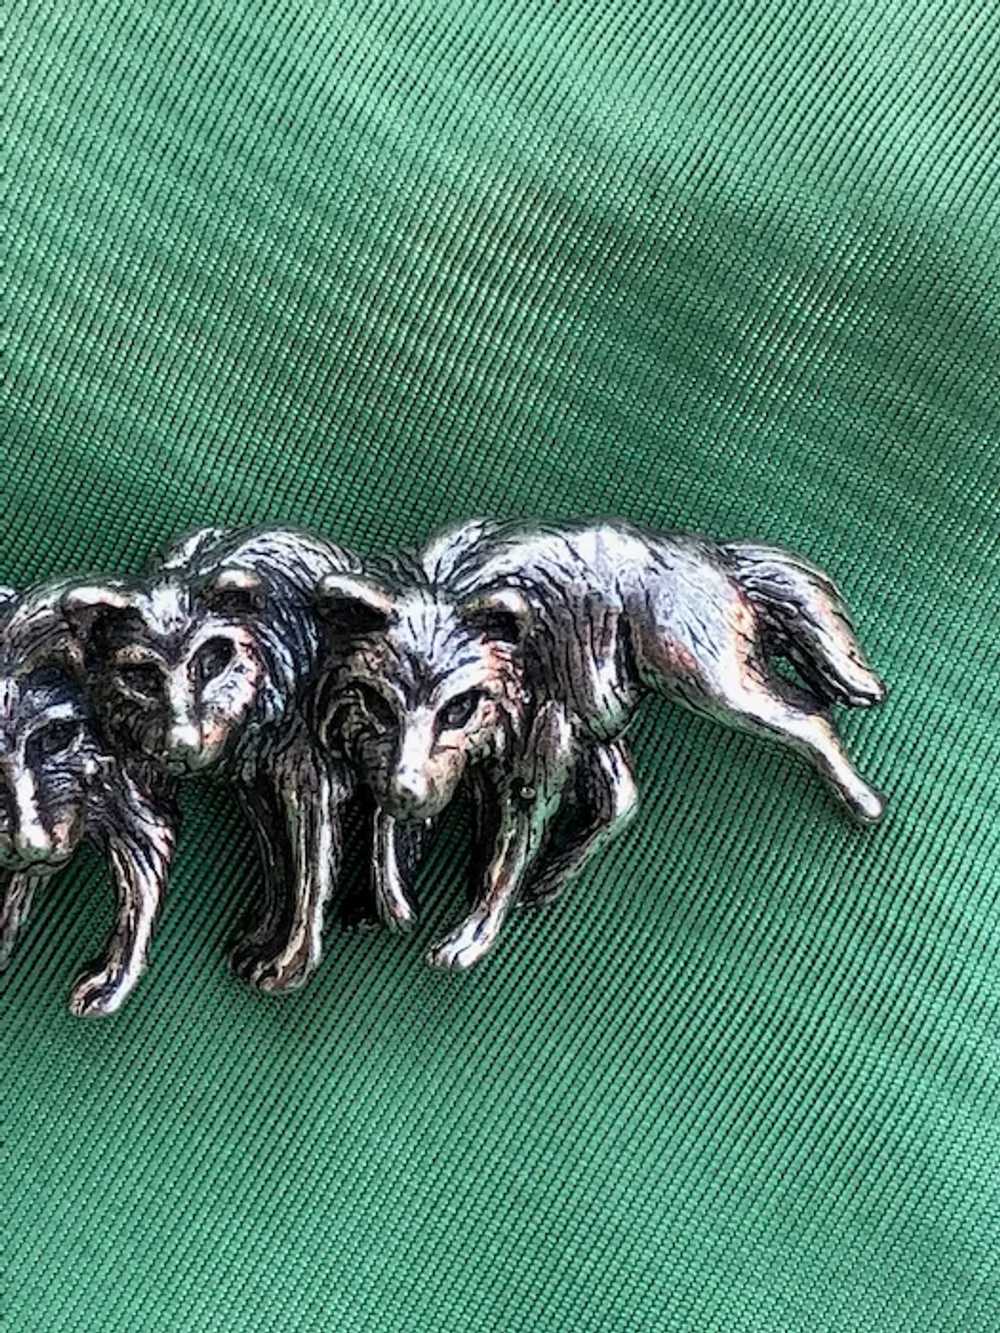 1980s Silver Wolf Brooch Sterling Cast - image 4